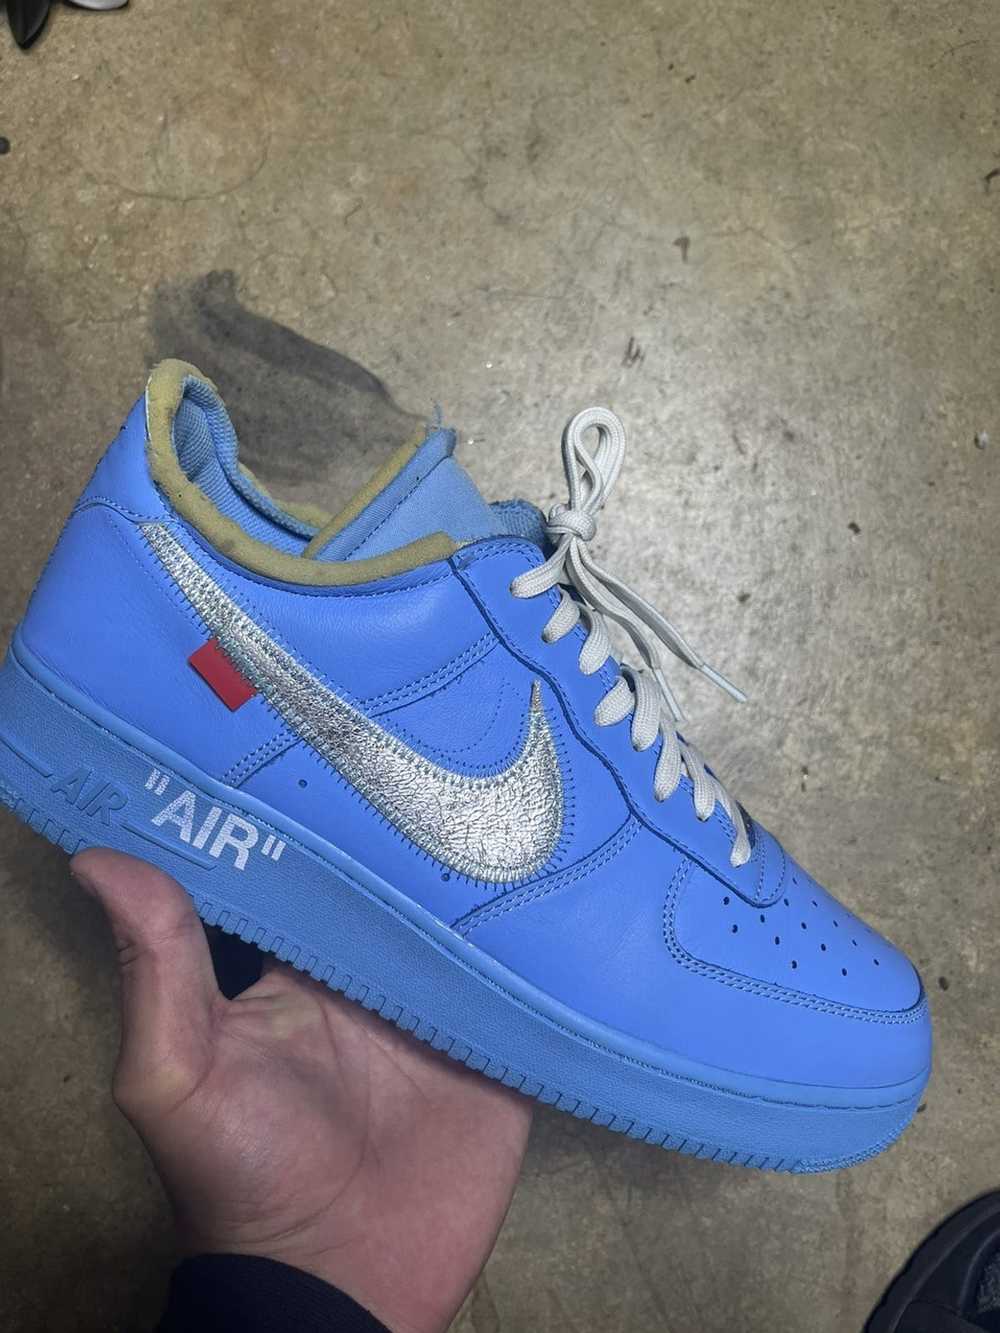 Nike AF1 Mid x Off White “Graffiti Black” 🎨 - Heres your first